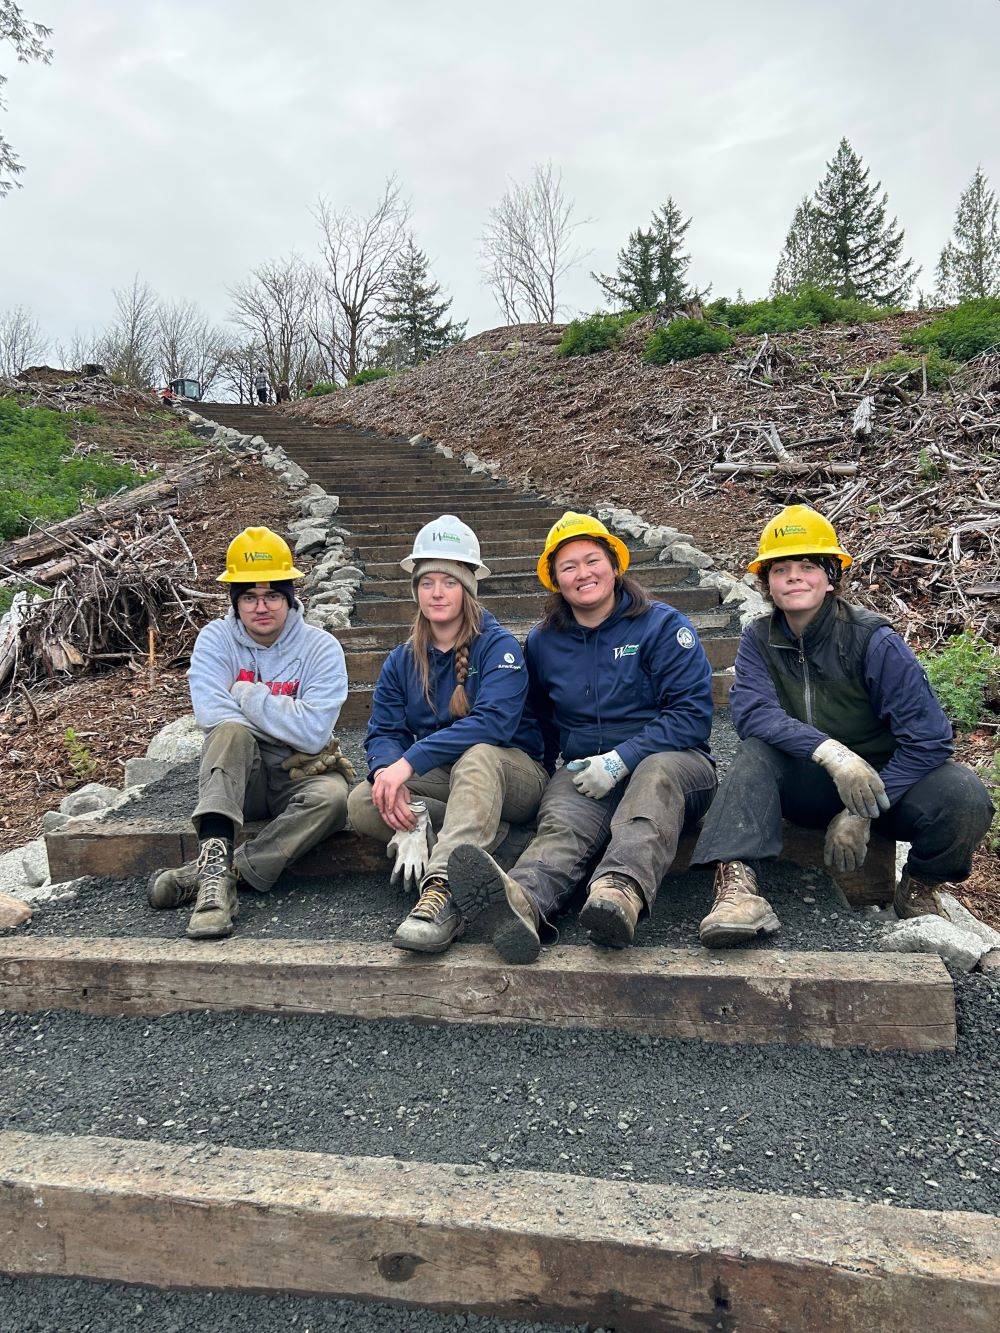 A WCC crew sits on a gravel and wood staircase running through an open restoration site.